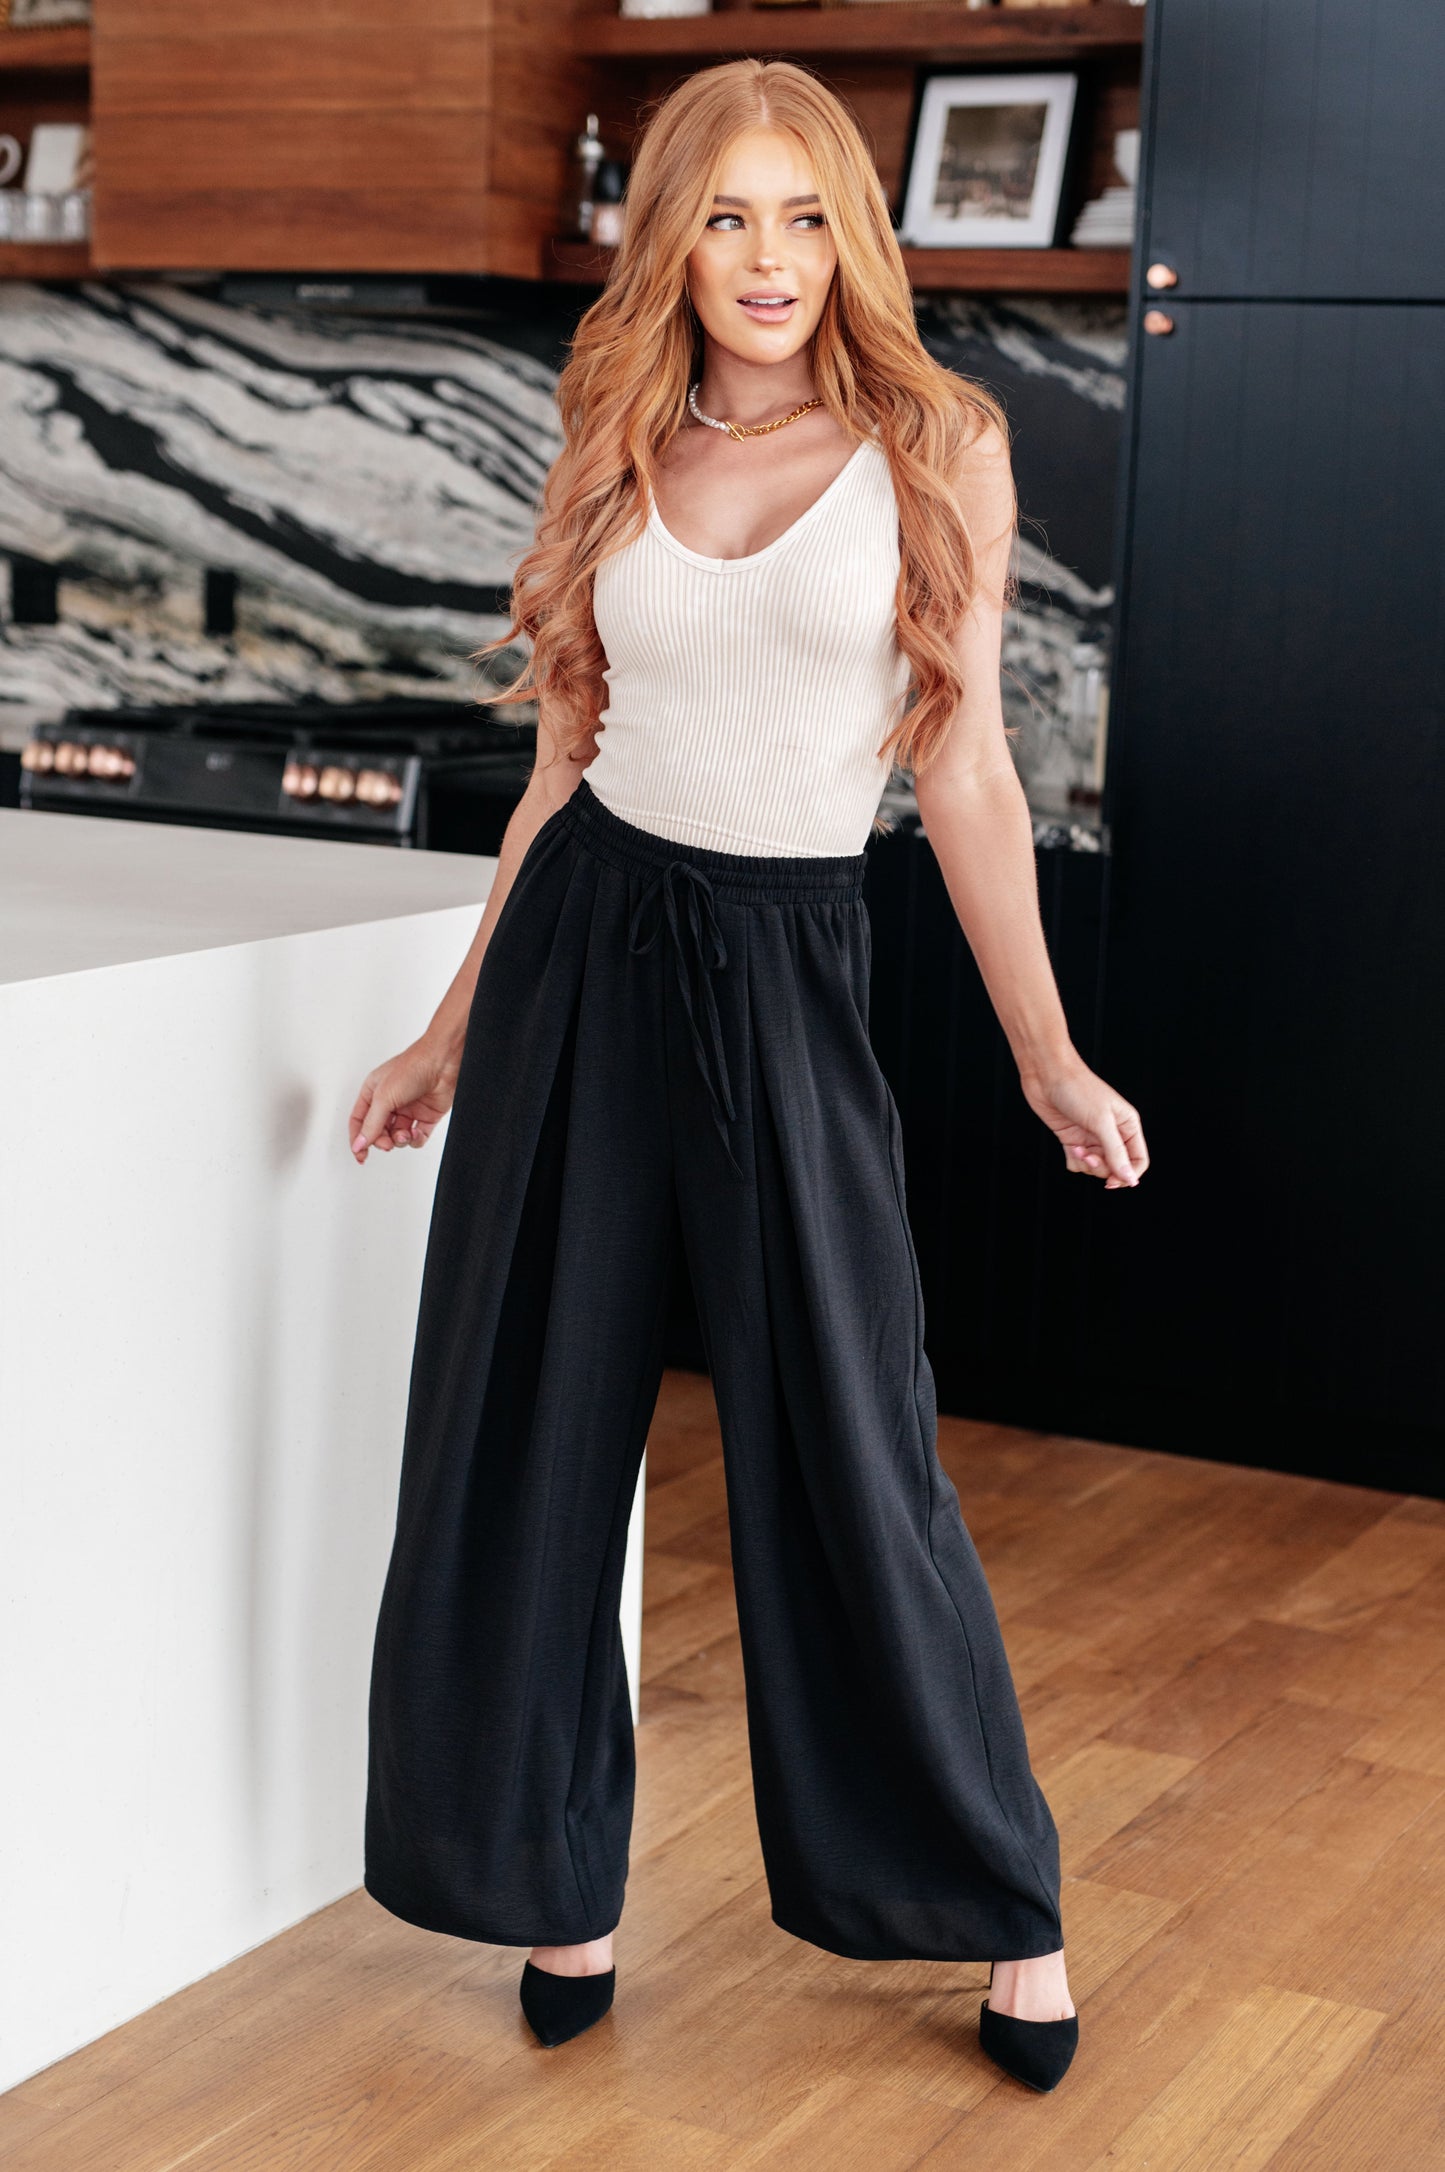 These gorgeous Send it On Wide Leg Pants feature a crinkle woven fabric, a cased elastic waistband, a functional drawstring, and flattering front pleats - for a stylish wide leg silhouette. Perfect for any occasion, these pants promise serious comfort and the trendiest looks this season! S - 3X